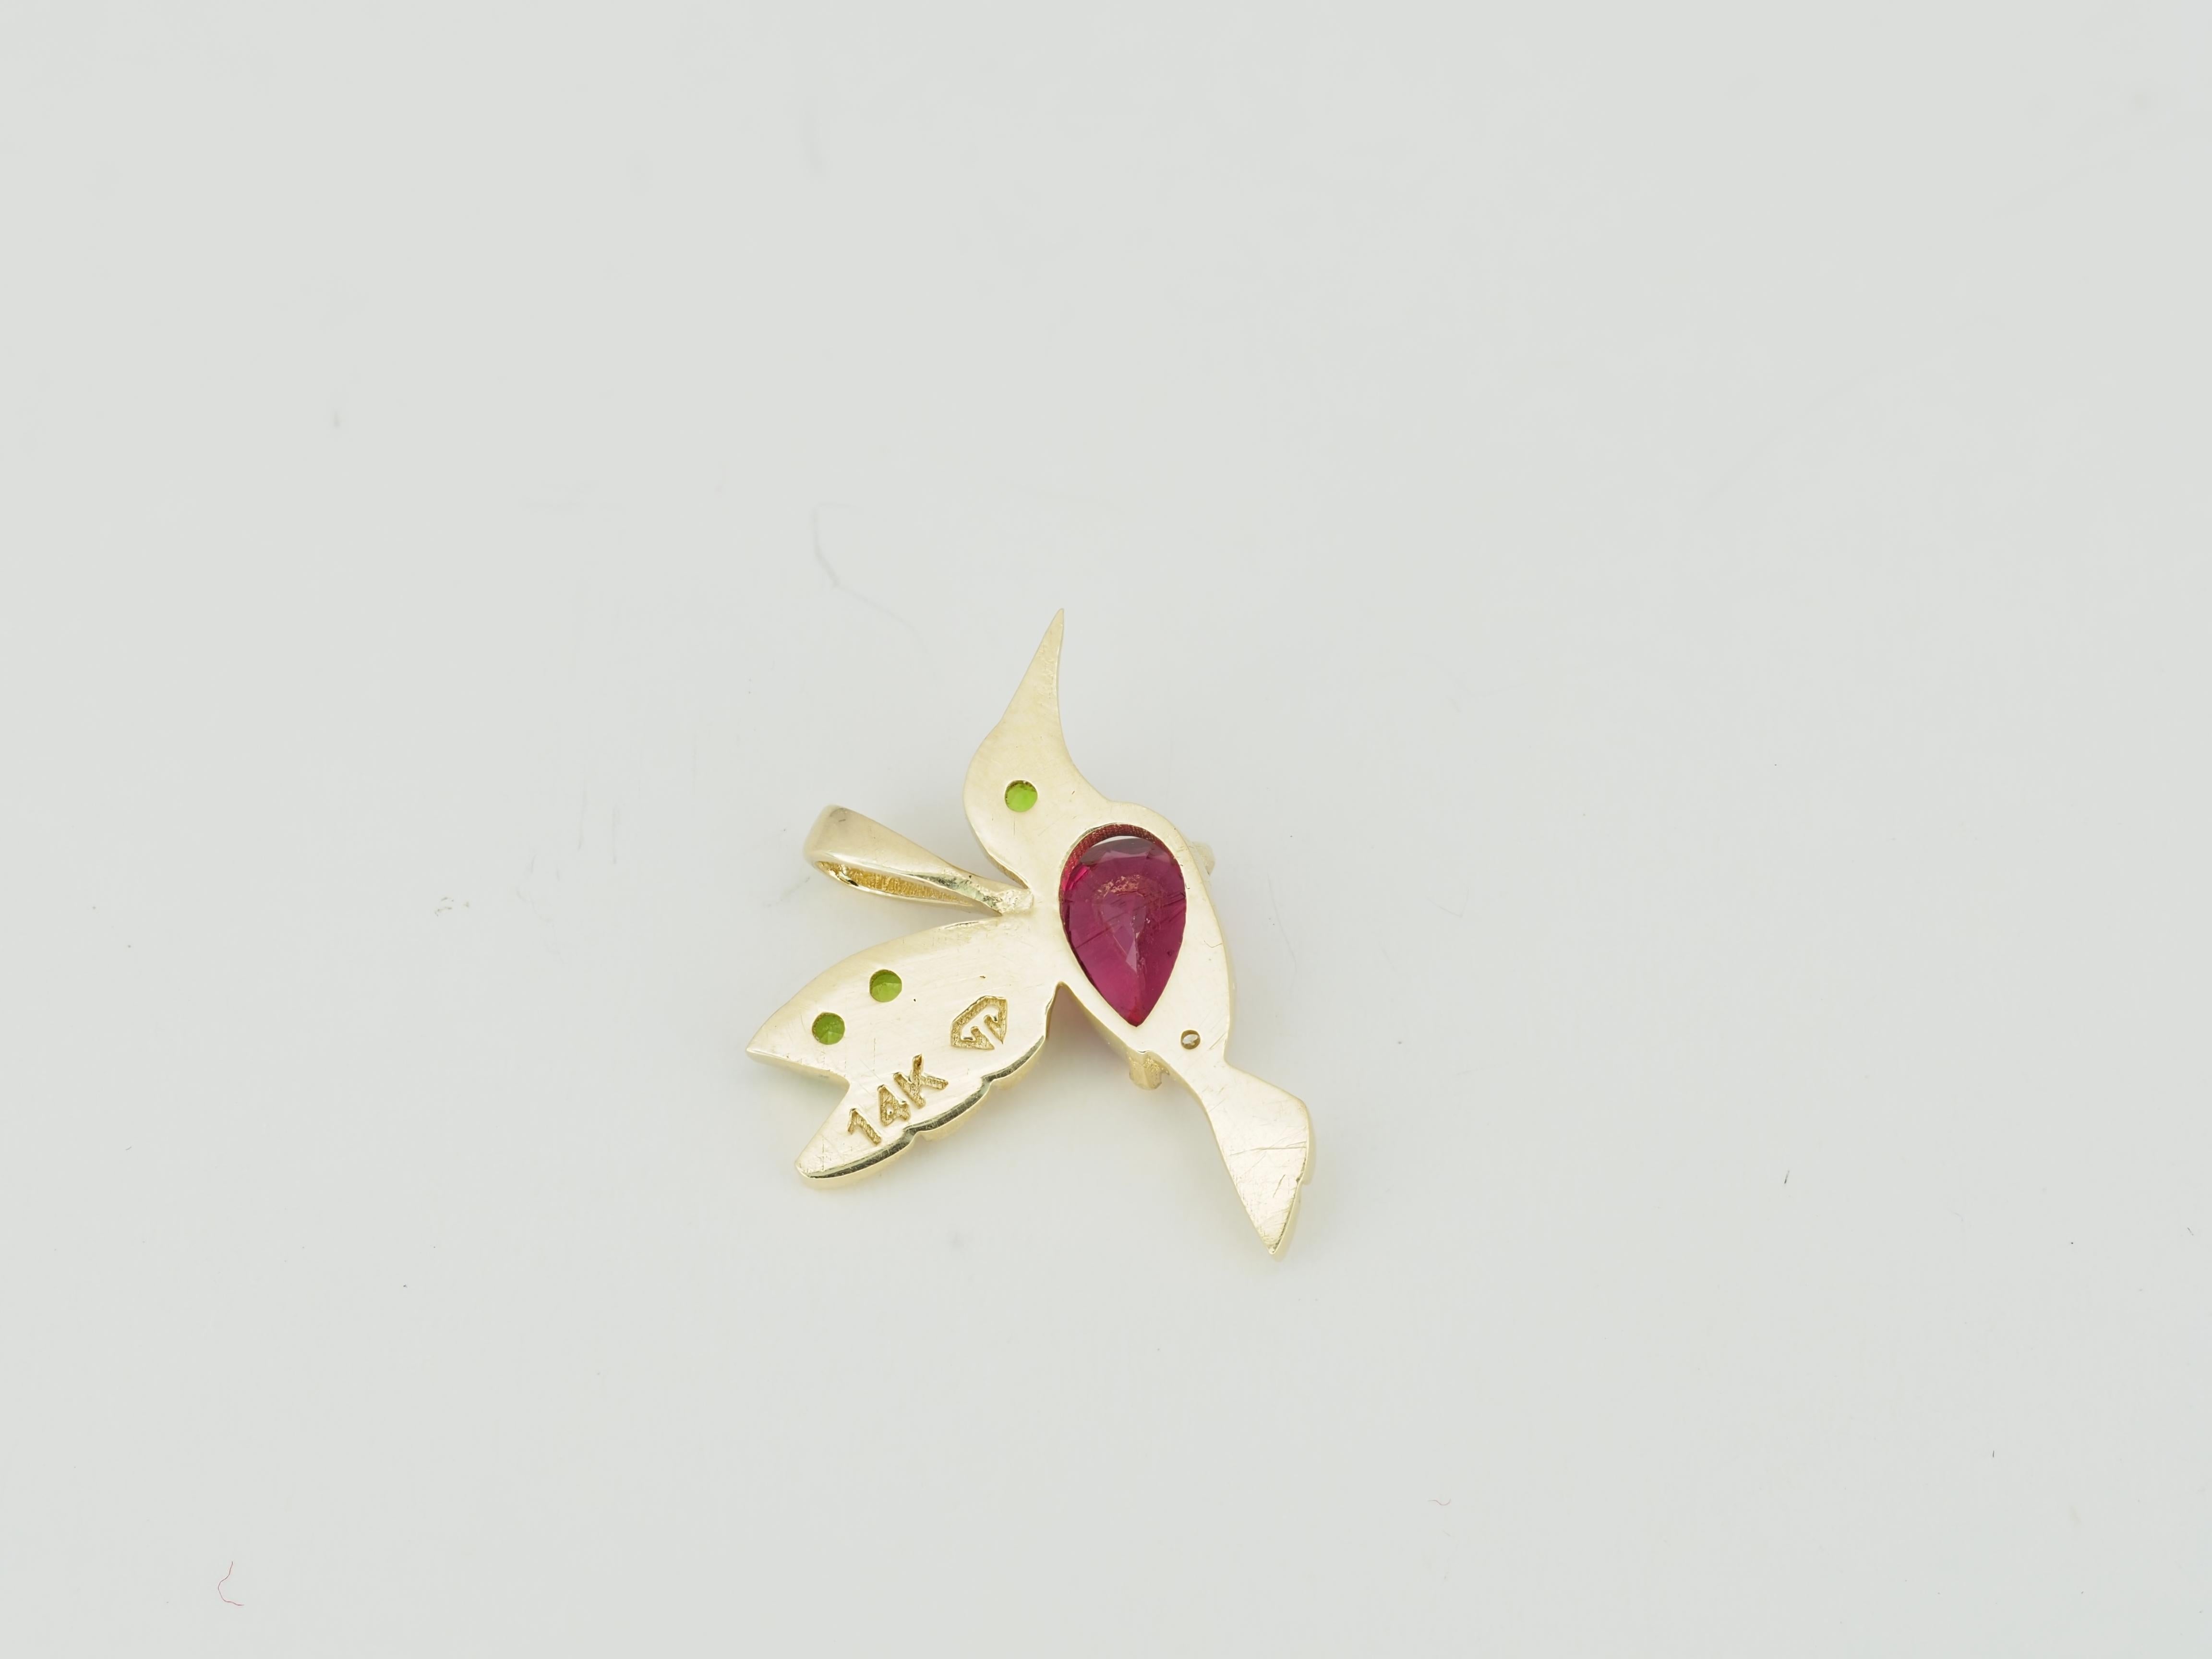 Pear Cut 14k Gold Hummingbird Pendant with Rubies, Bird Pendant with Colored Gemstones For Sale